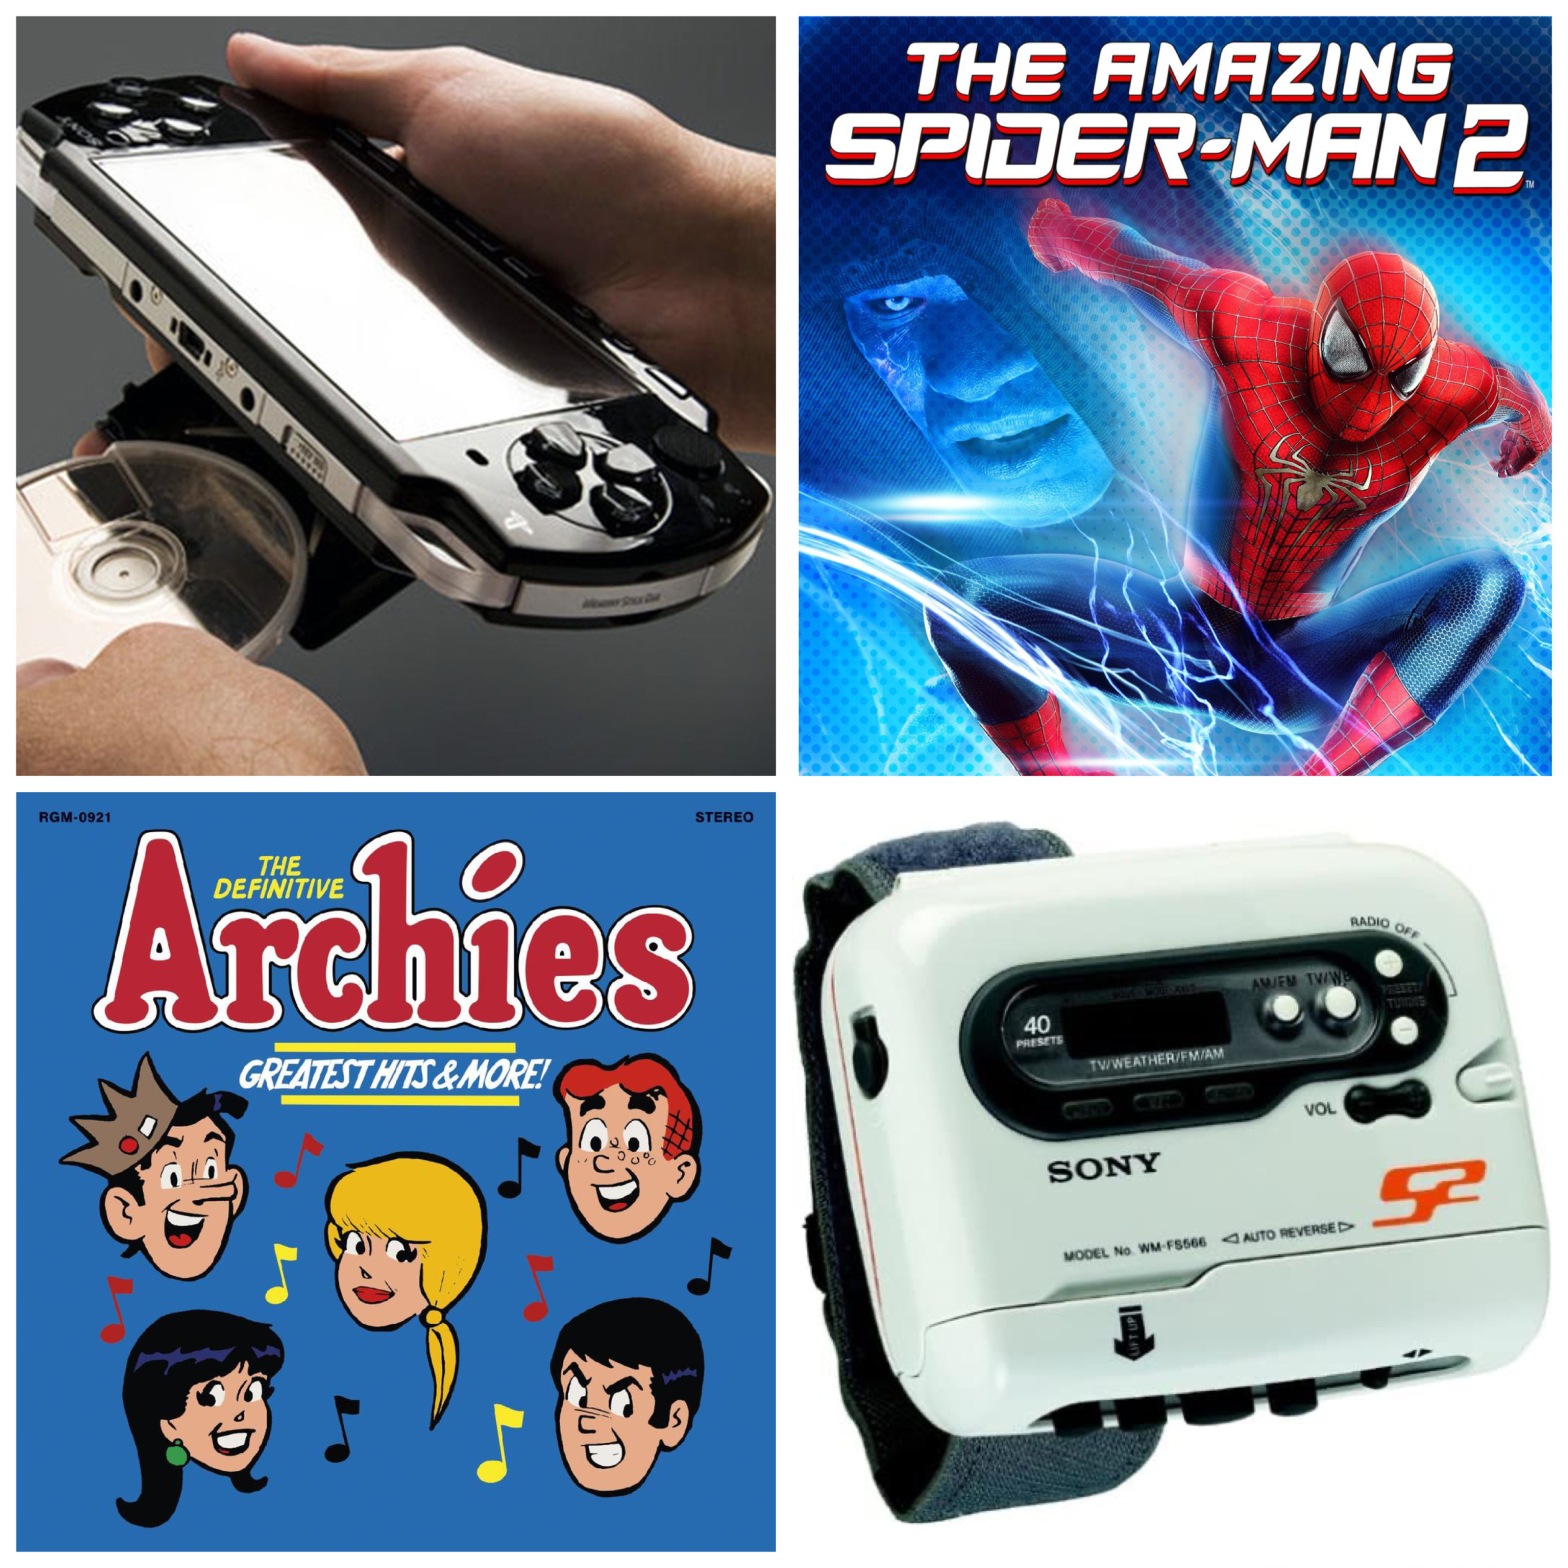 A Sony PSP, The Amazing Spider-Man 2, The Archies, and a Sony Walkman.